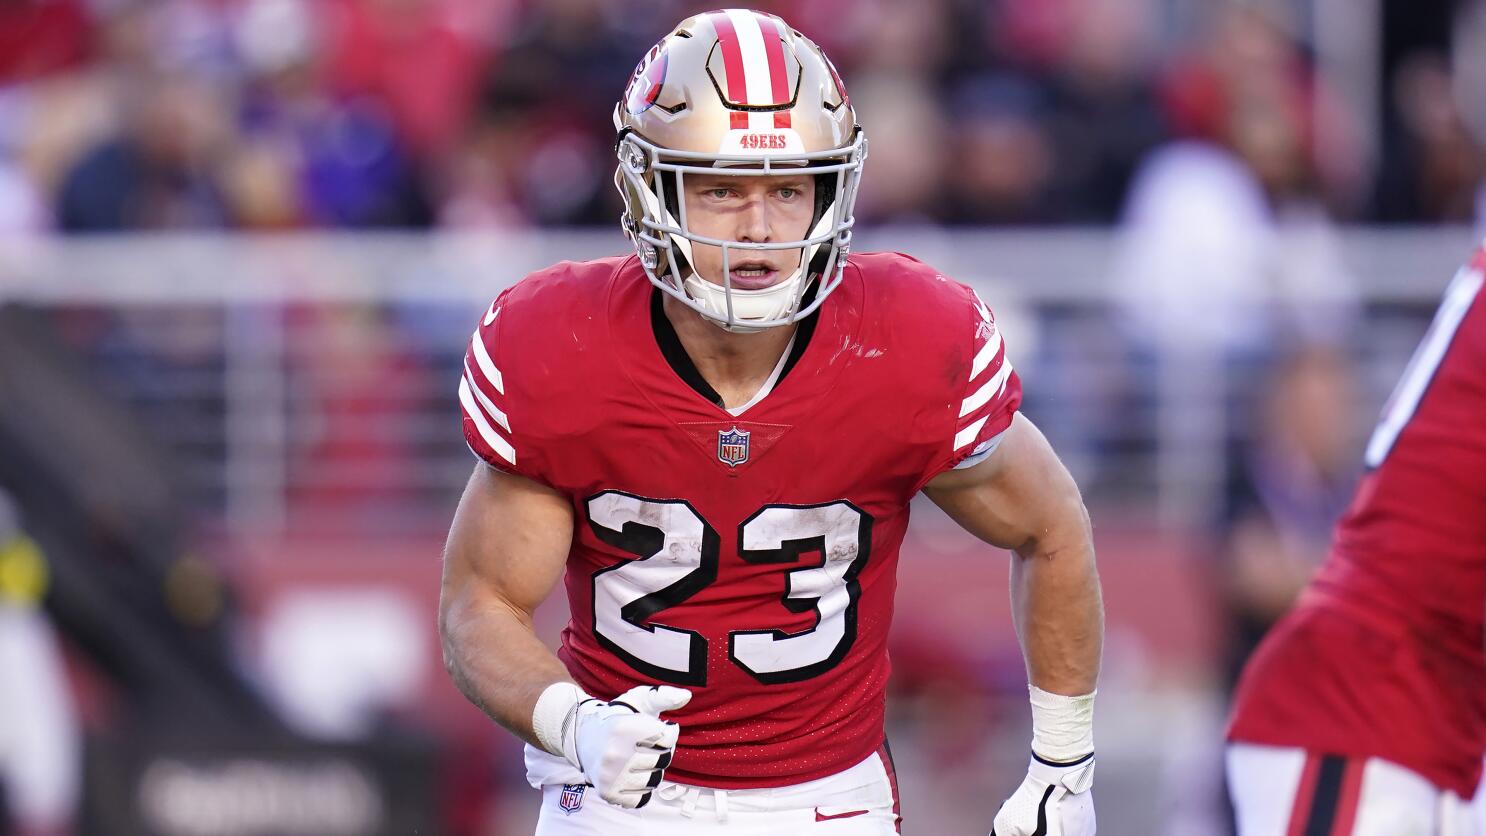 Christian McCaffrey likely to suit up for 49ers vs. Chiefs